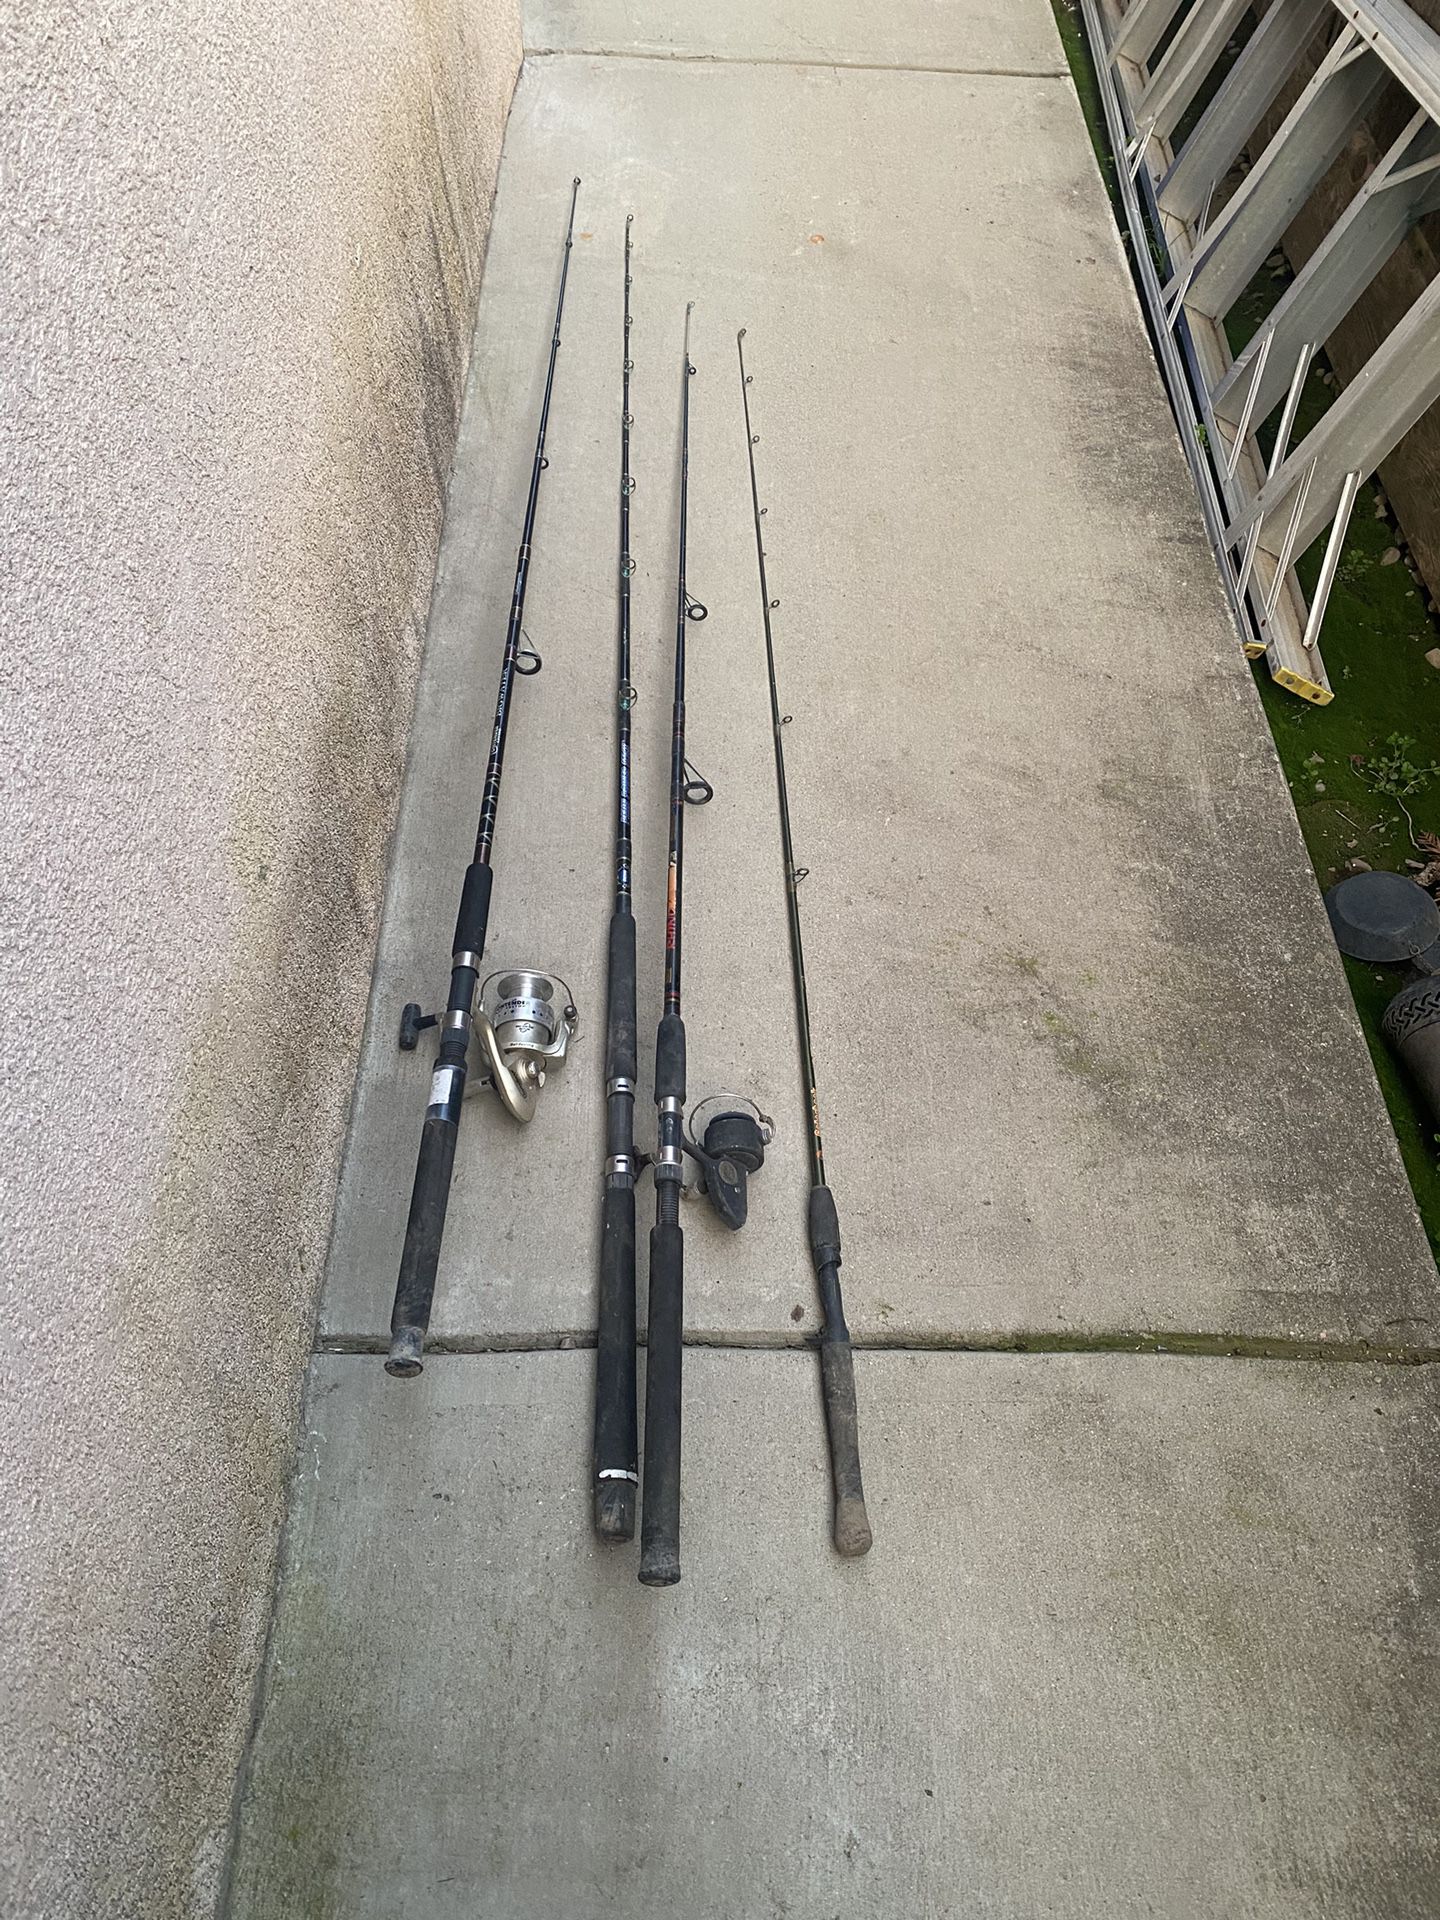 4 Fishing Rods and 2 Reels For$80 All In Good Shape 